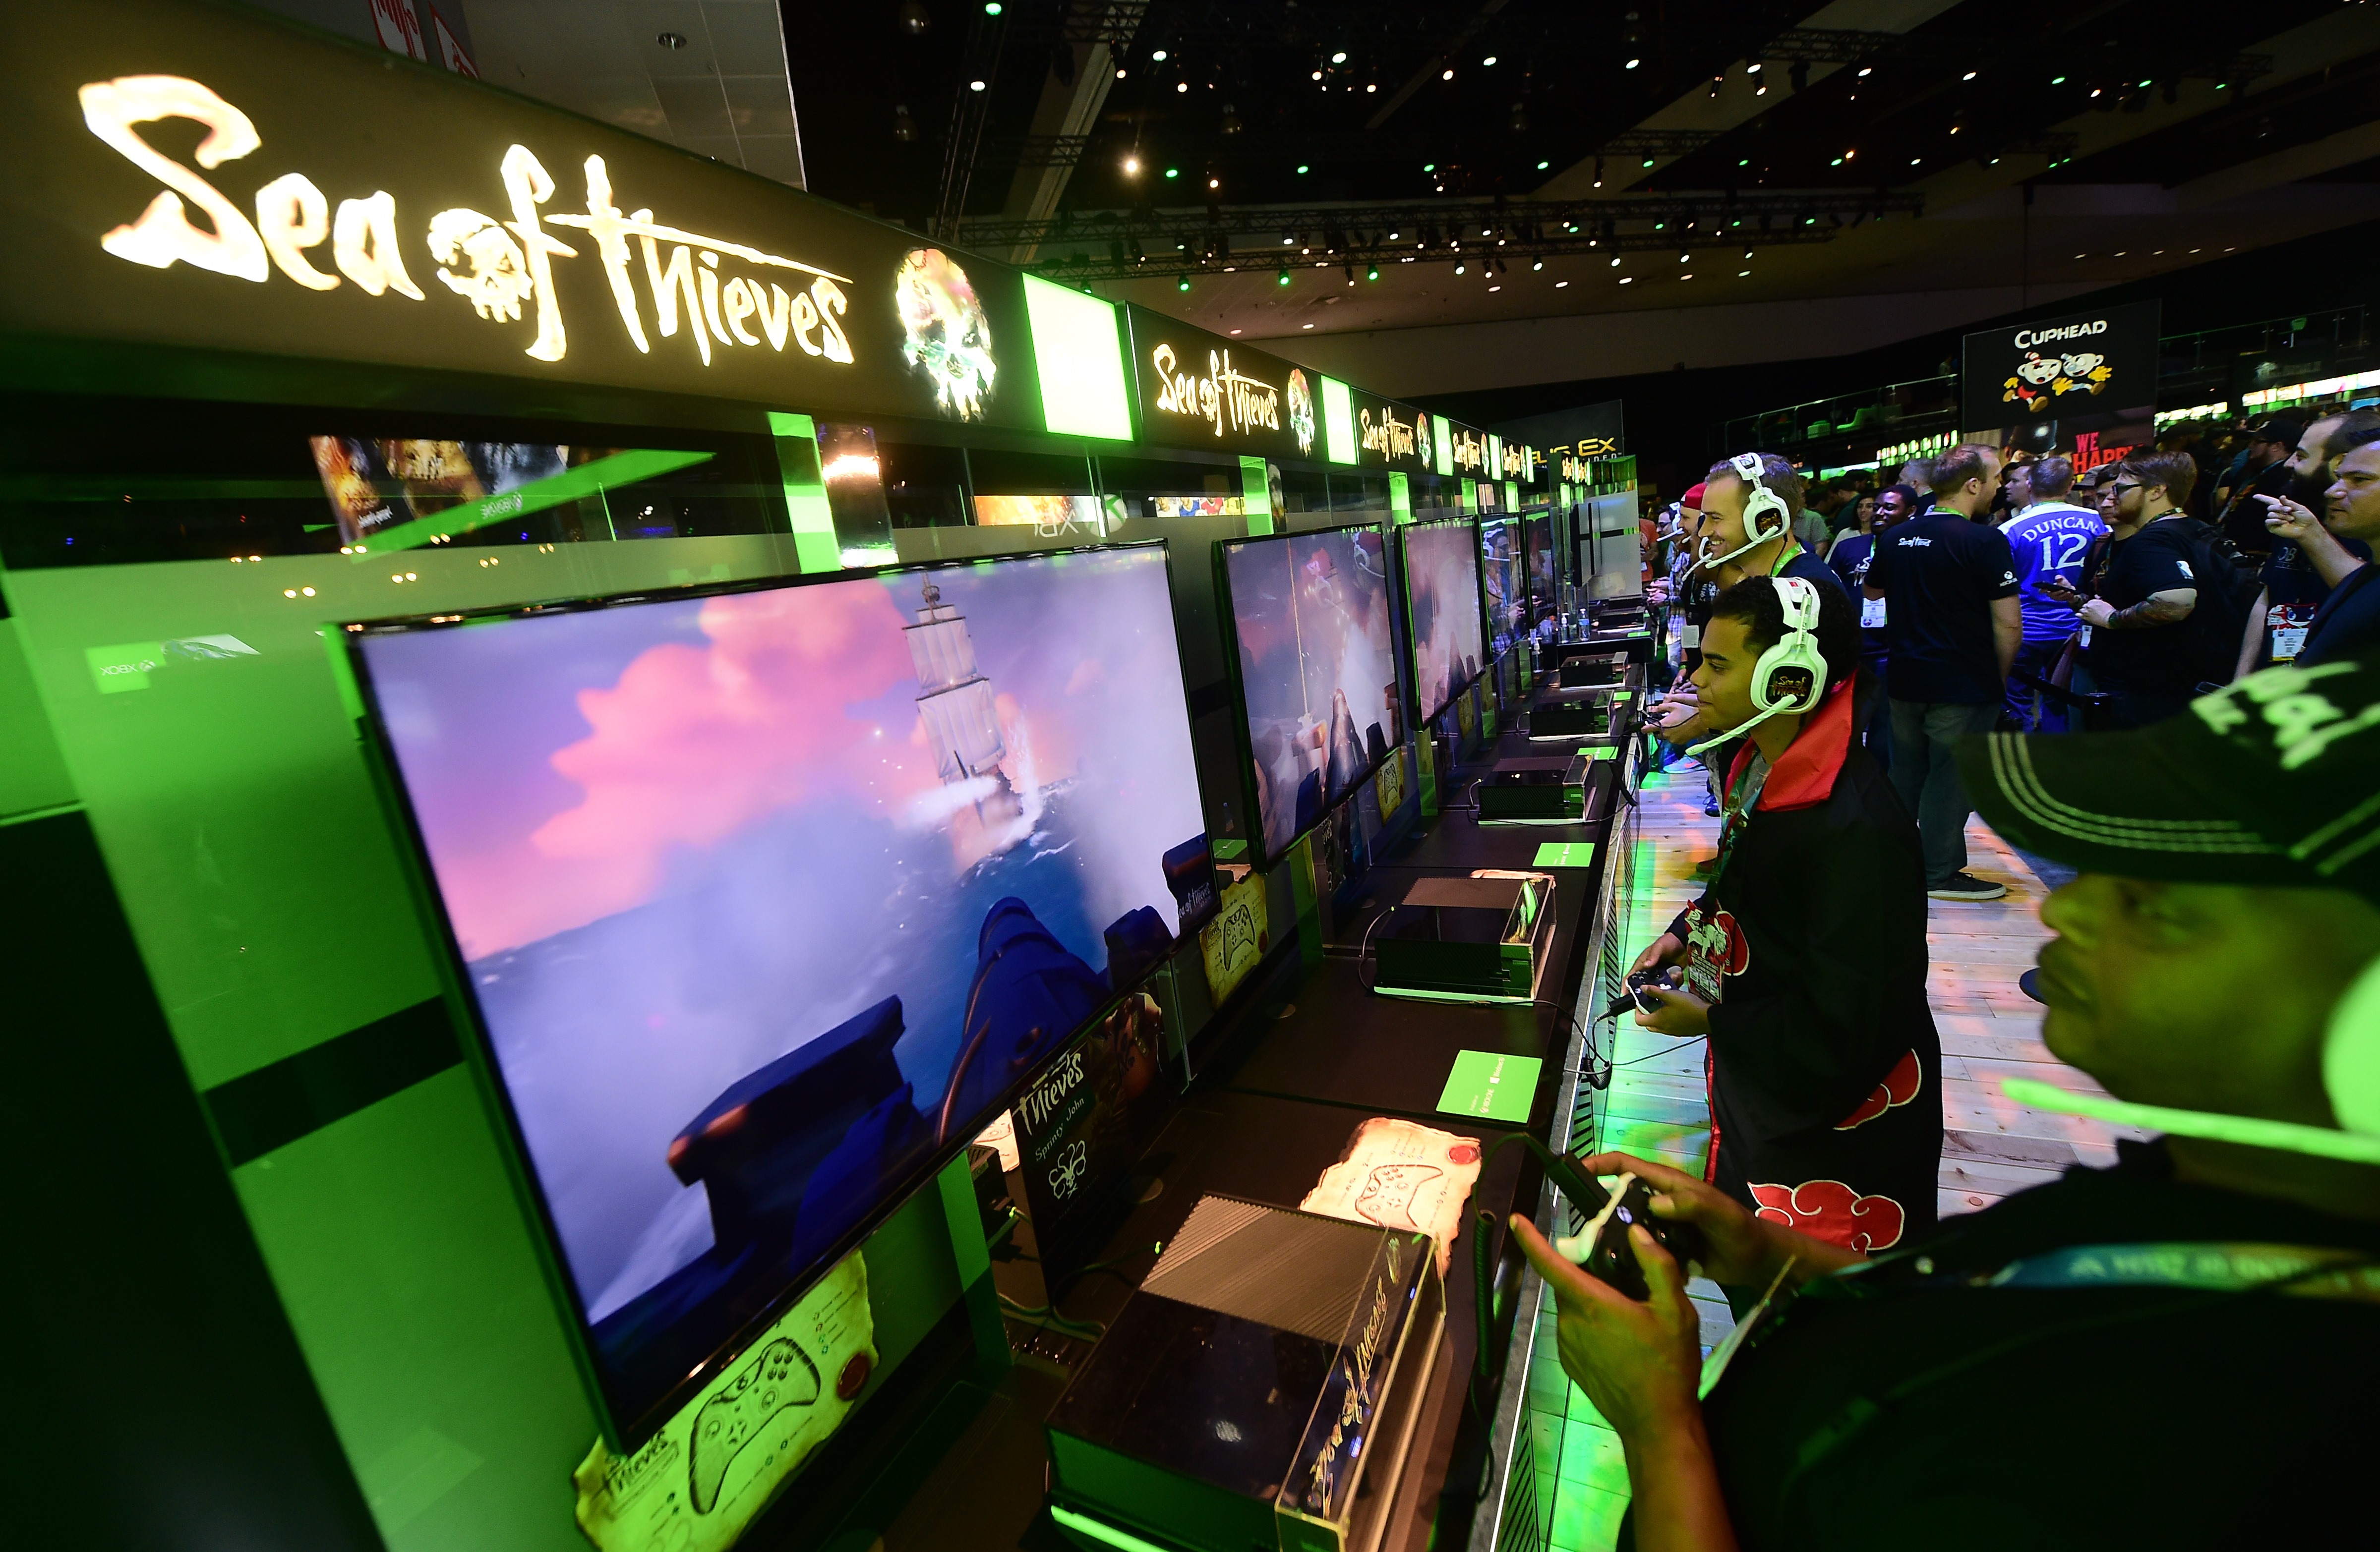 The Xbox game 'Sea of Thieves' attracts a crowd of players at the Los Angeles Convention Center during the second day of 2016 Electronic Entertainment Expo (E3) annual video game conference and show on June 15, 2016 in Los Angeles, California. / AFP PHOTO / FREDERIC J. BROWN